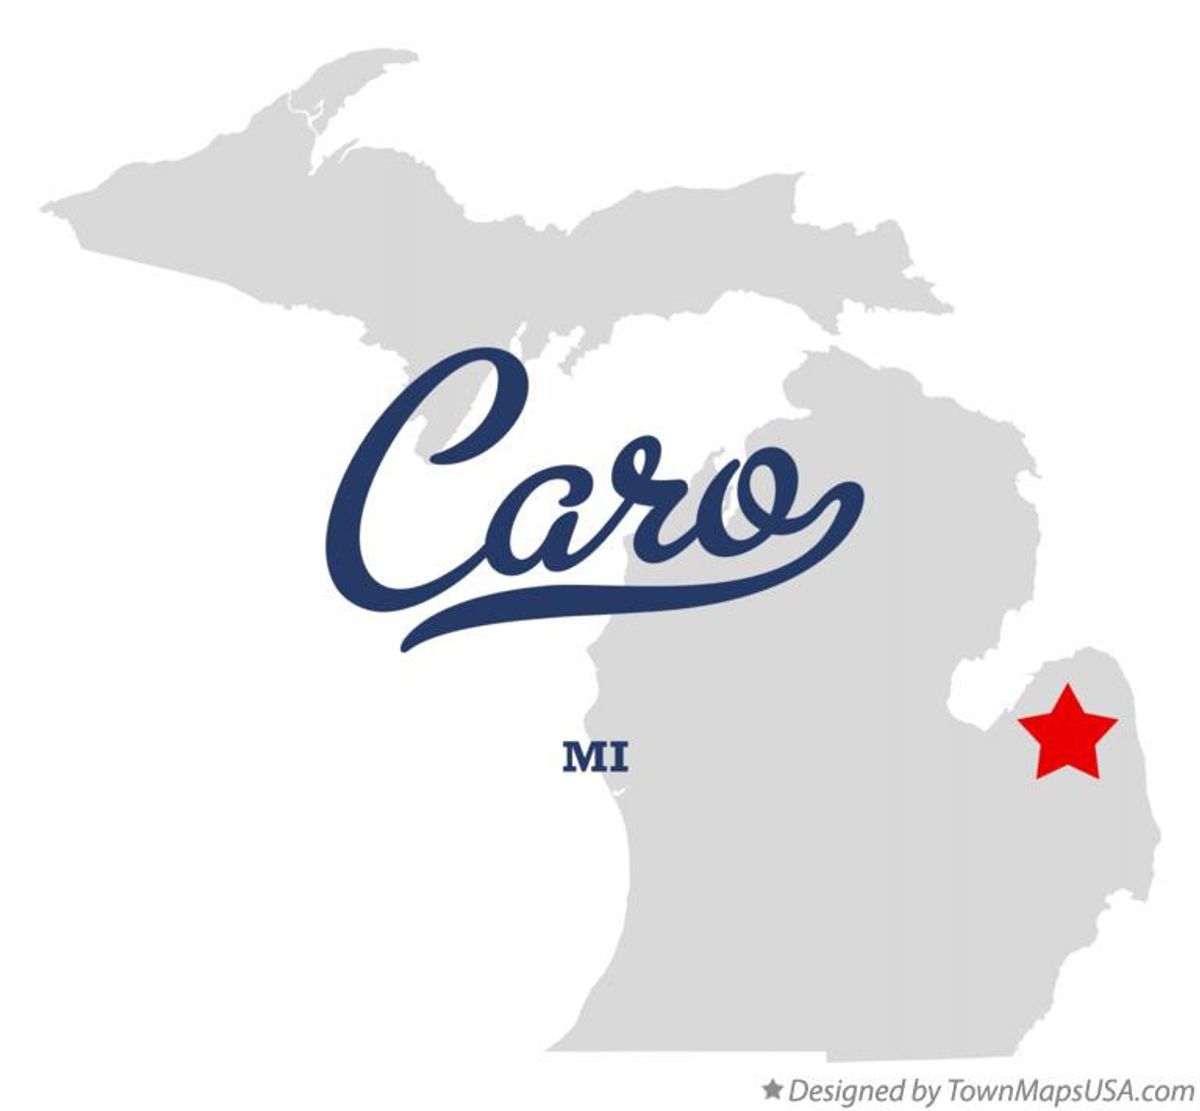 How Living In Caro, MI, Has Changed My Life